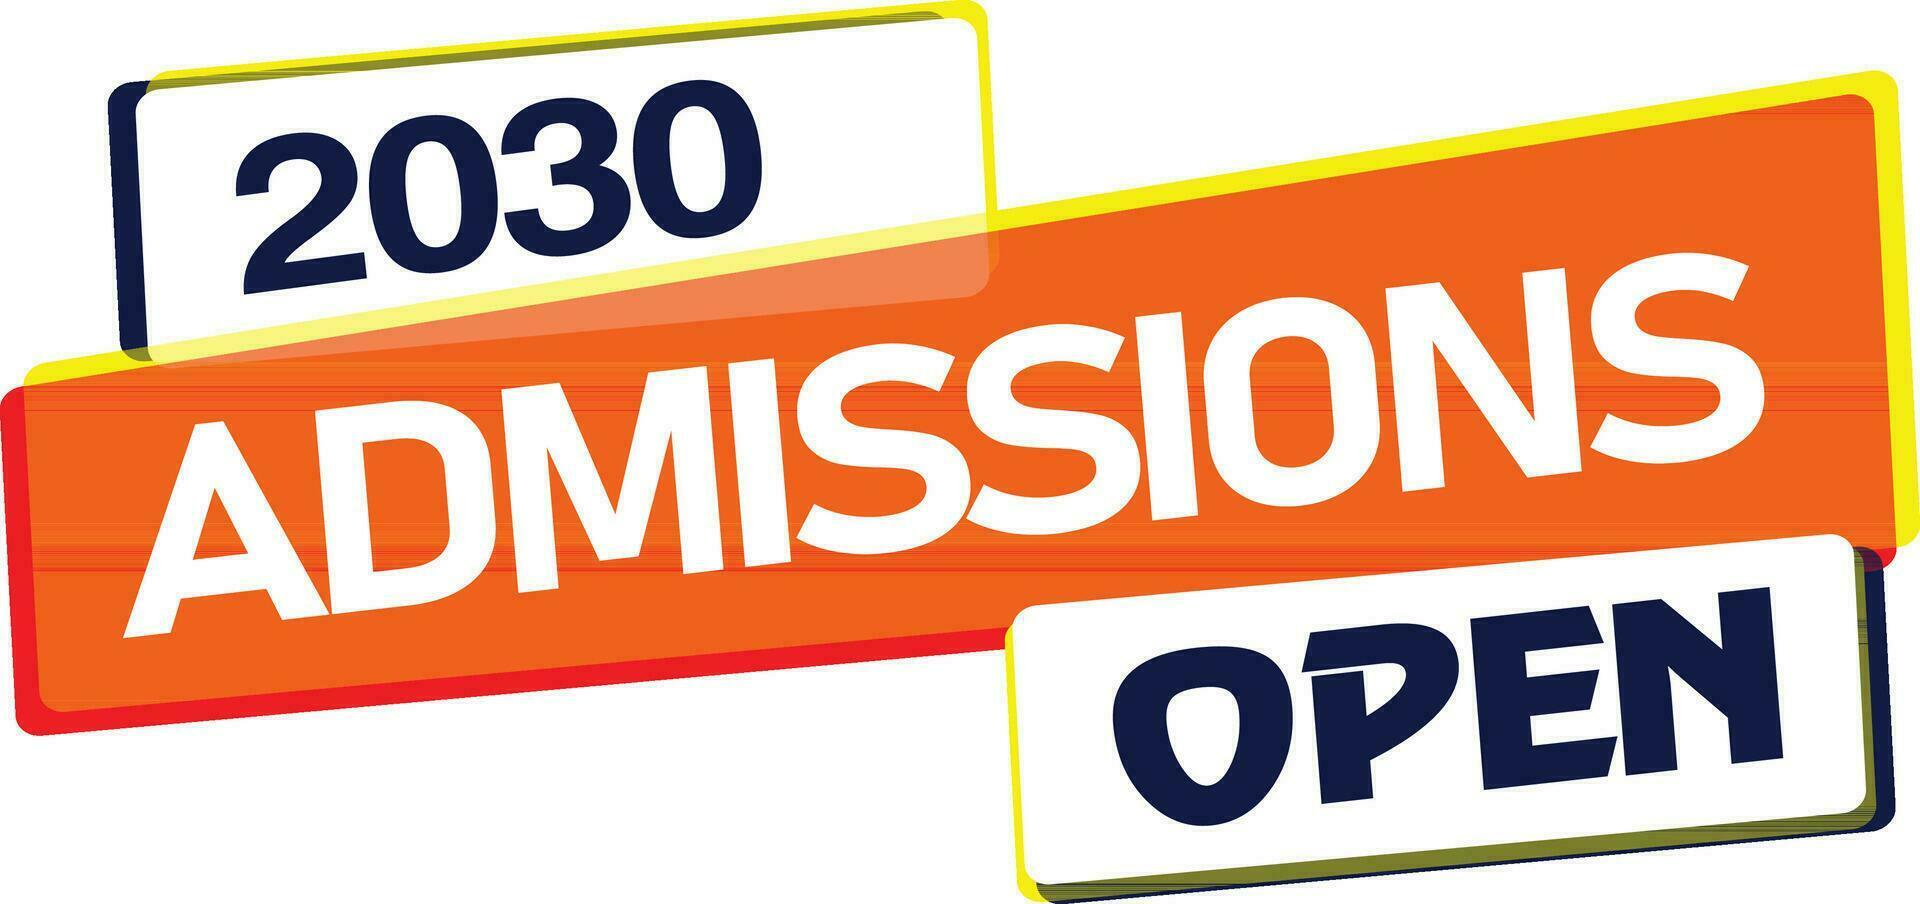 2023 admission open banner abstract school college coaching clipart vector